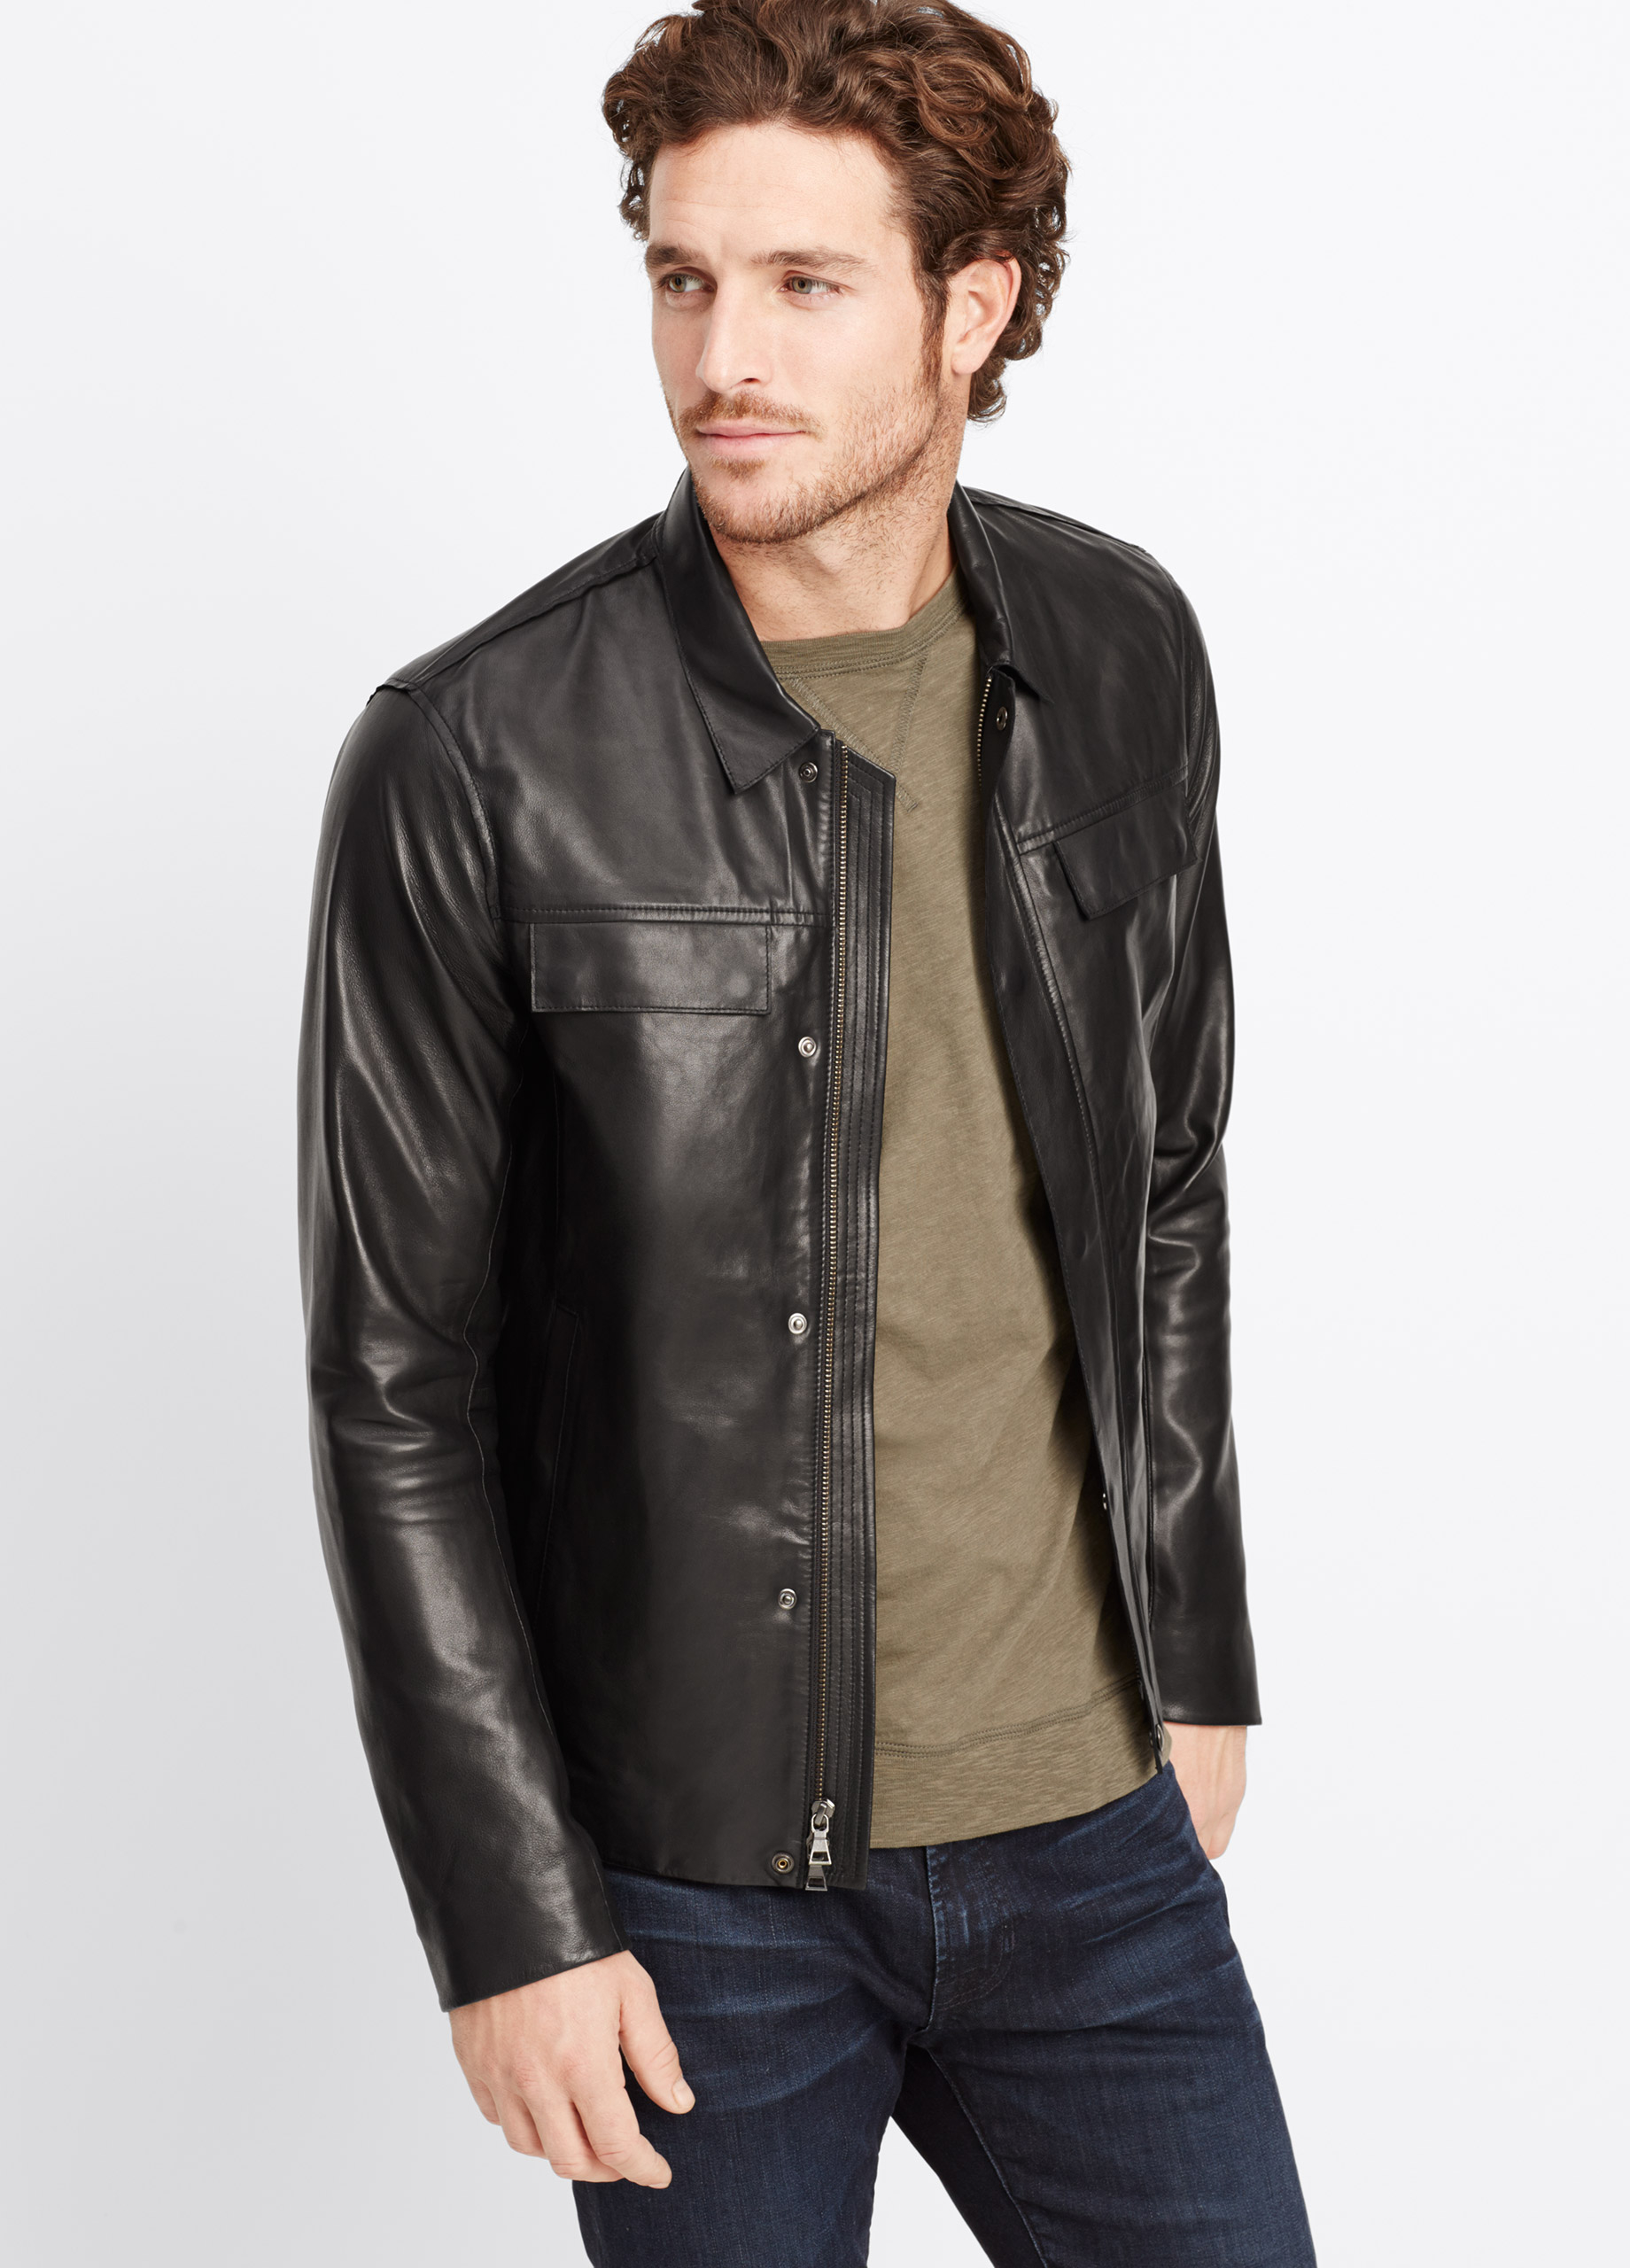 Lyst - Vince Raw Edge Leather Jacket in Black for Men